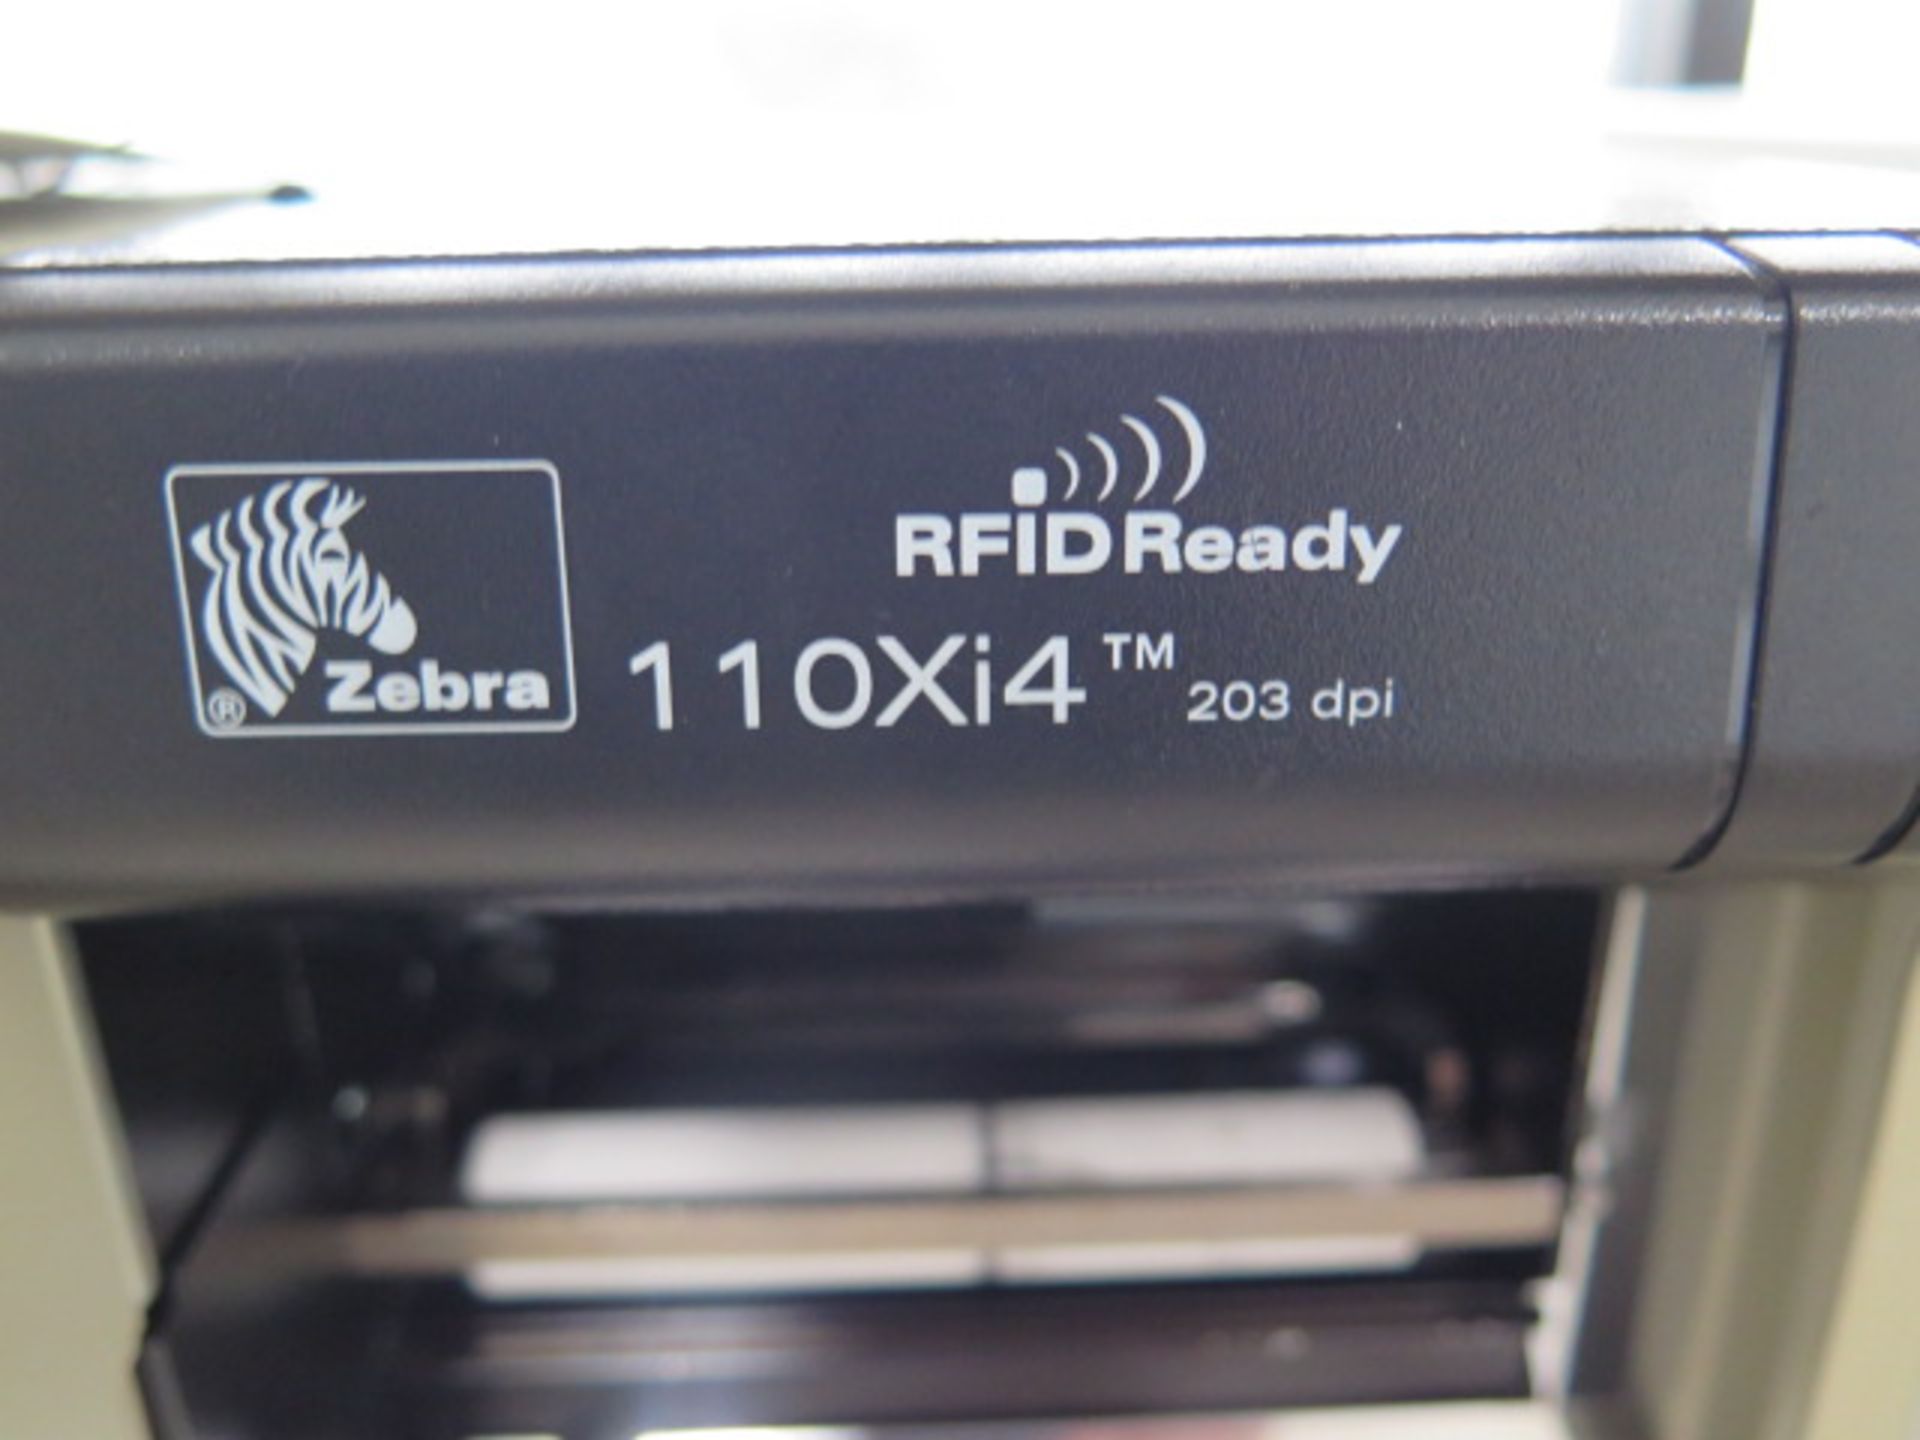 Zebra 110Xi4 Label Printer RFID Ready (SOLD AS-IS - NO WARRANTY) - Image 6 of 6